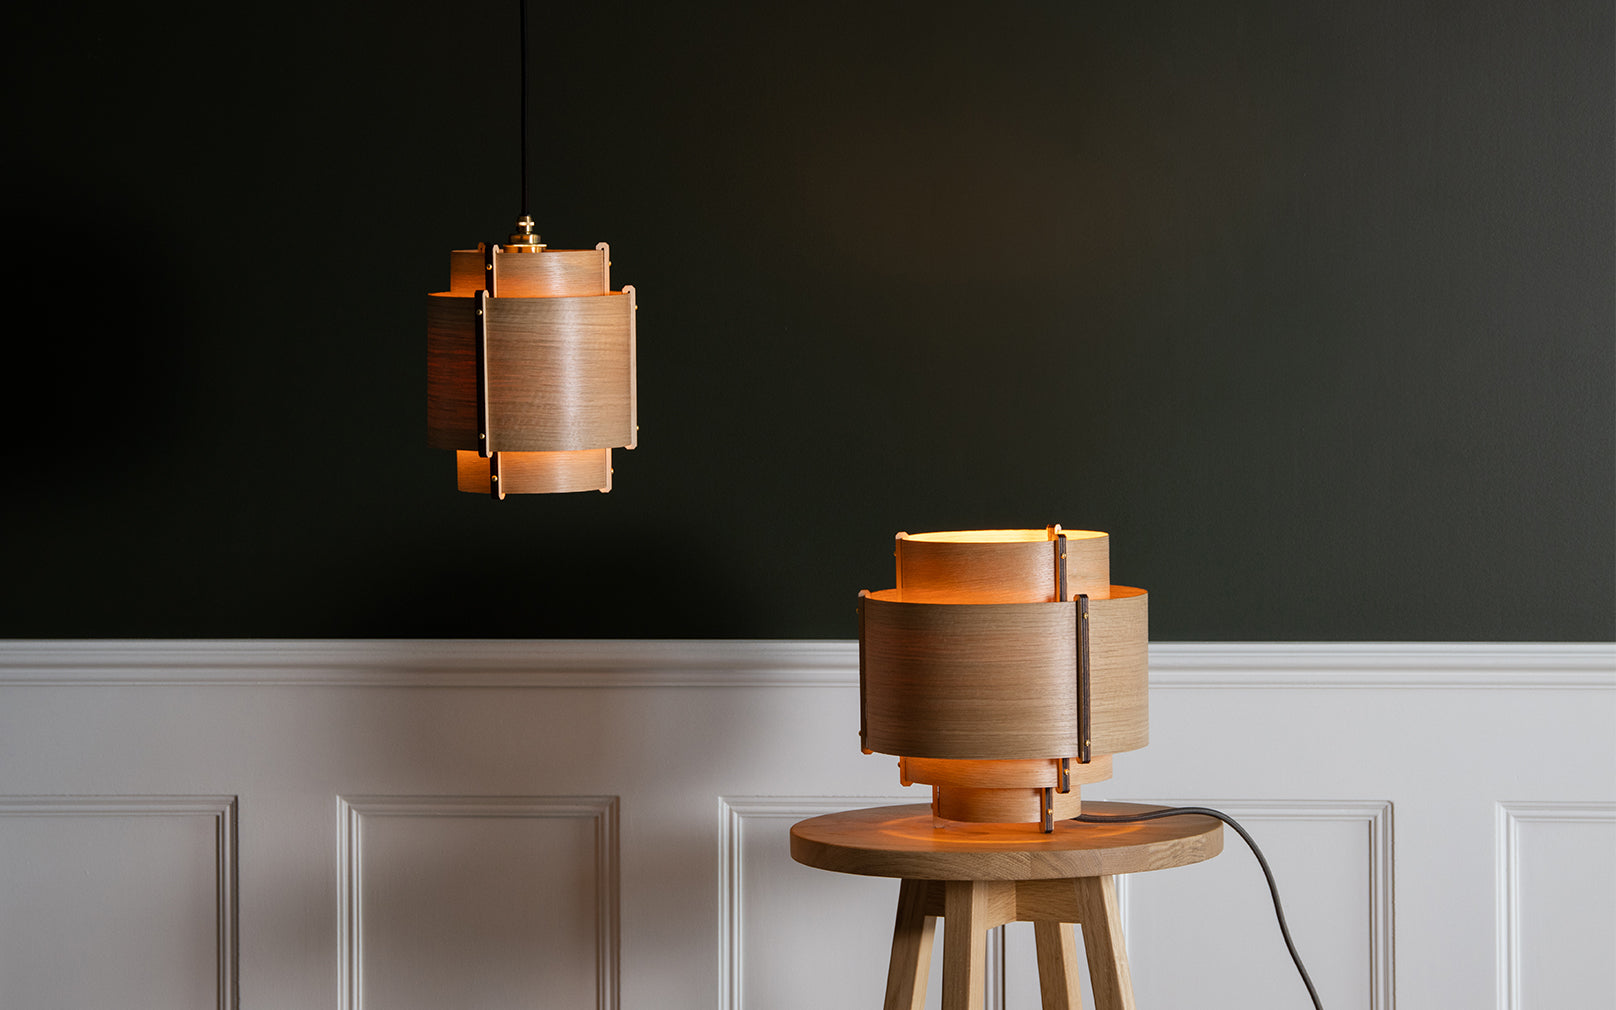 Tom Raffield Leven Table Light and Leven Pendant Small